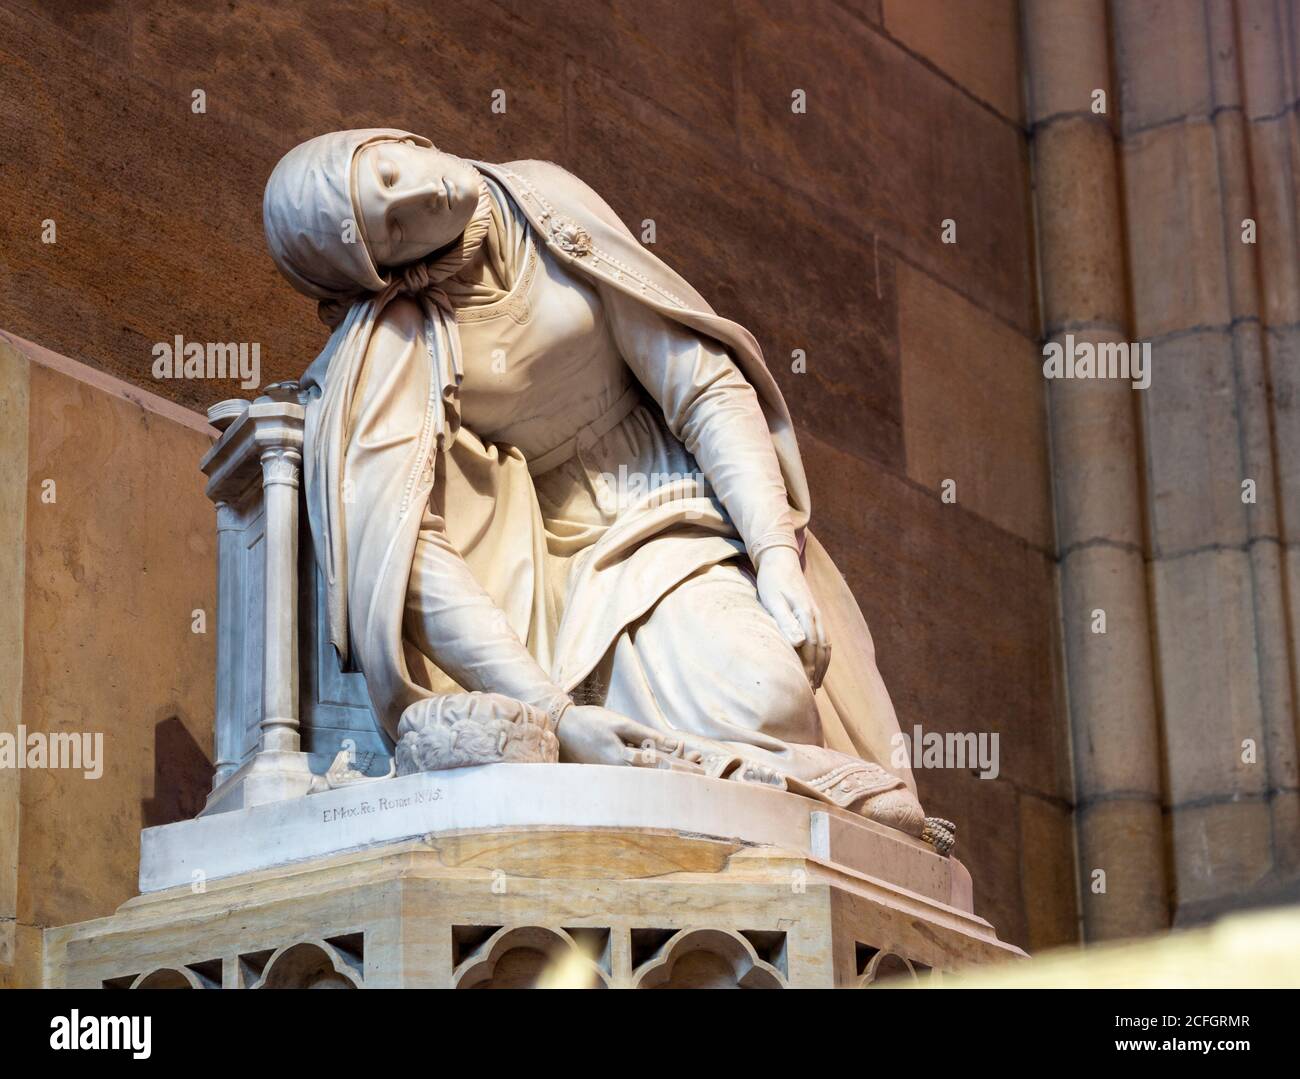 The Statue of Saint Ludmila of Bohemia: Sculpted by Emanuel Max in 1845 it is located in St. Vitus Cathedral's Chapel of Saint Ludmila. Stock Photo